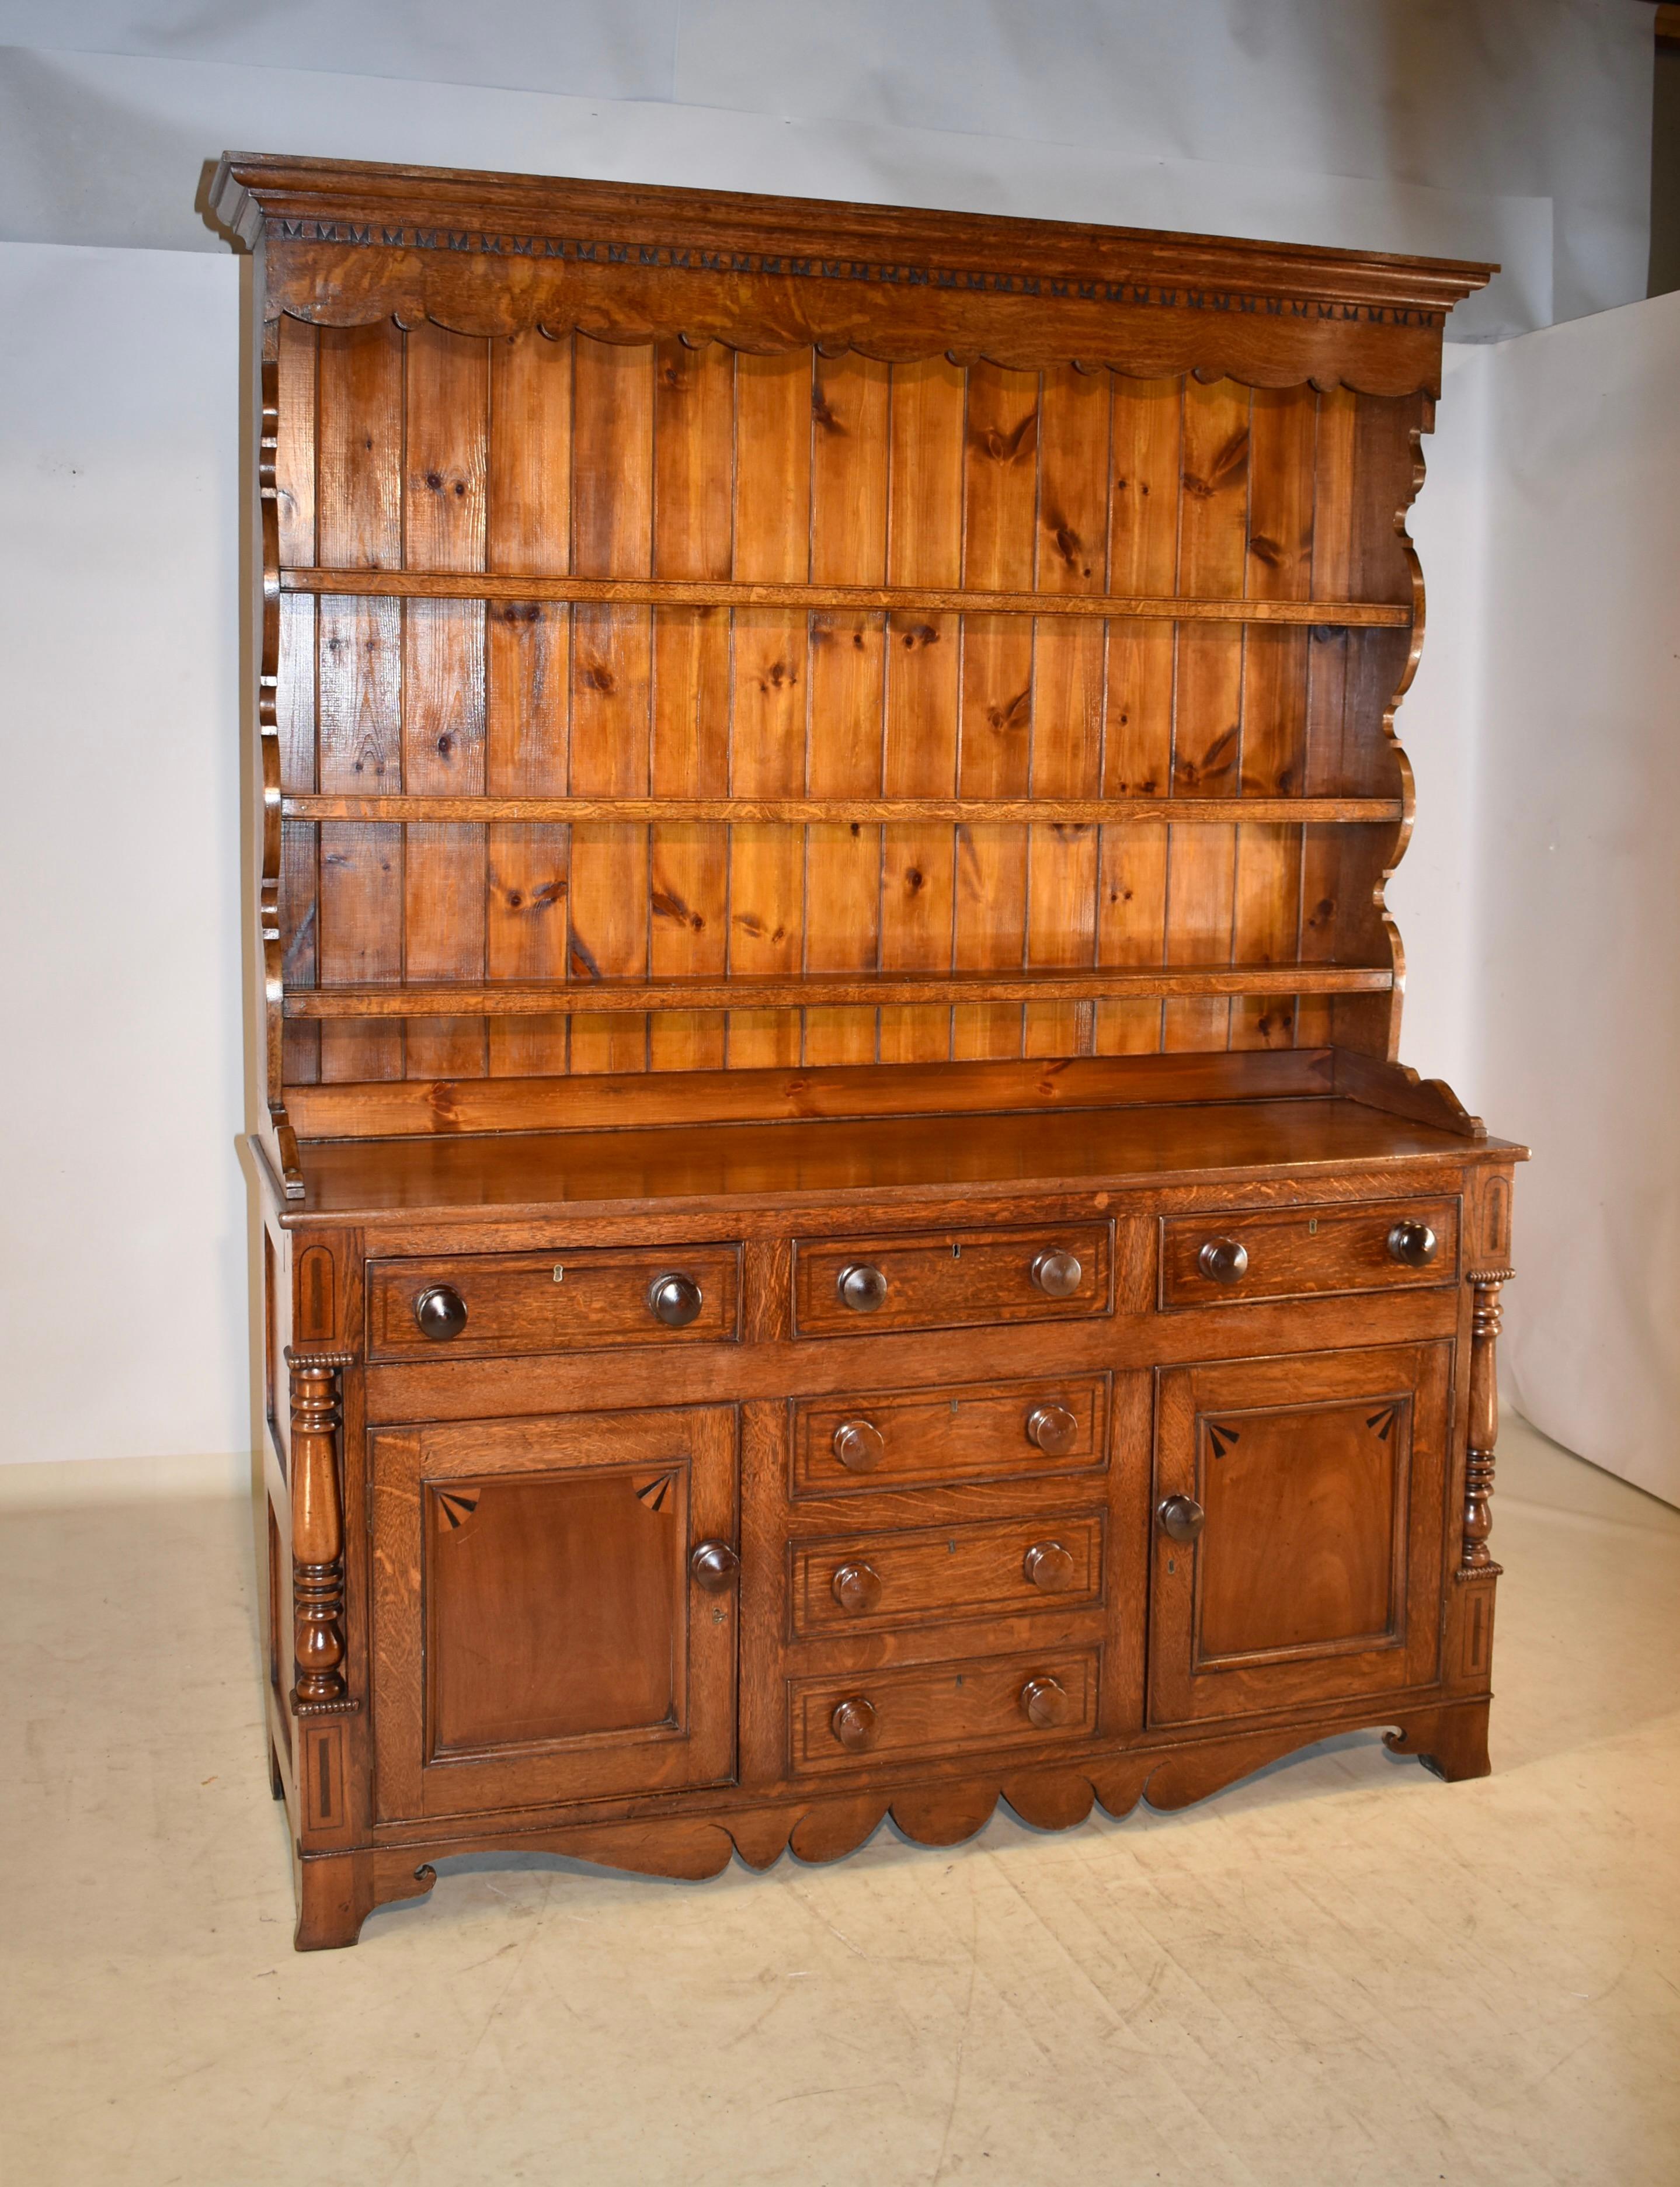 Early 19th century welsh oak dresser with crown molding gracing the top of the cabinet over a scalloped and hand carved decorated apron. It has three shelves which are flanked by scalloped sides. The top sits atop the base, which has paneled sides